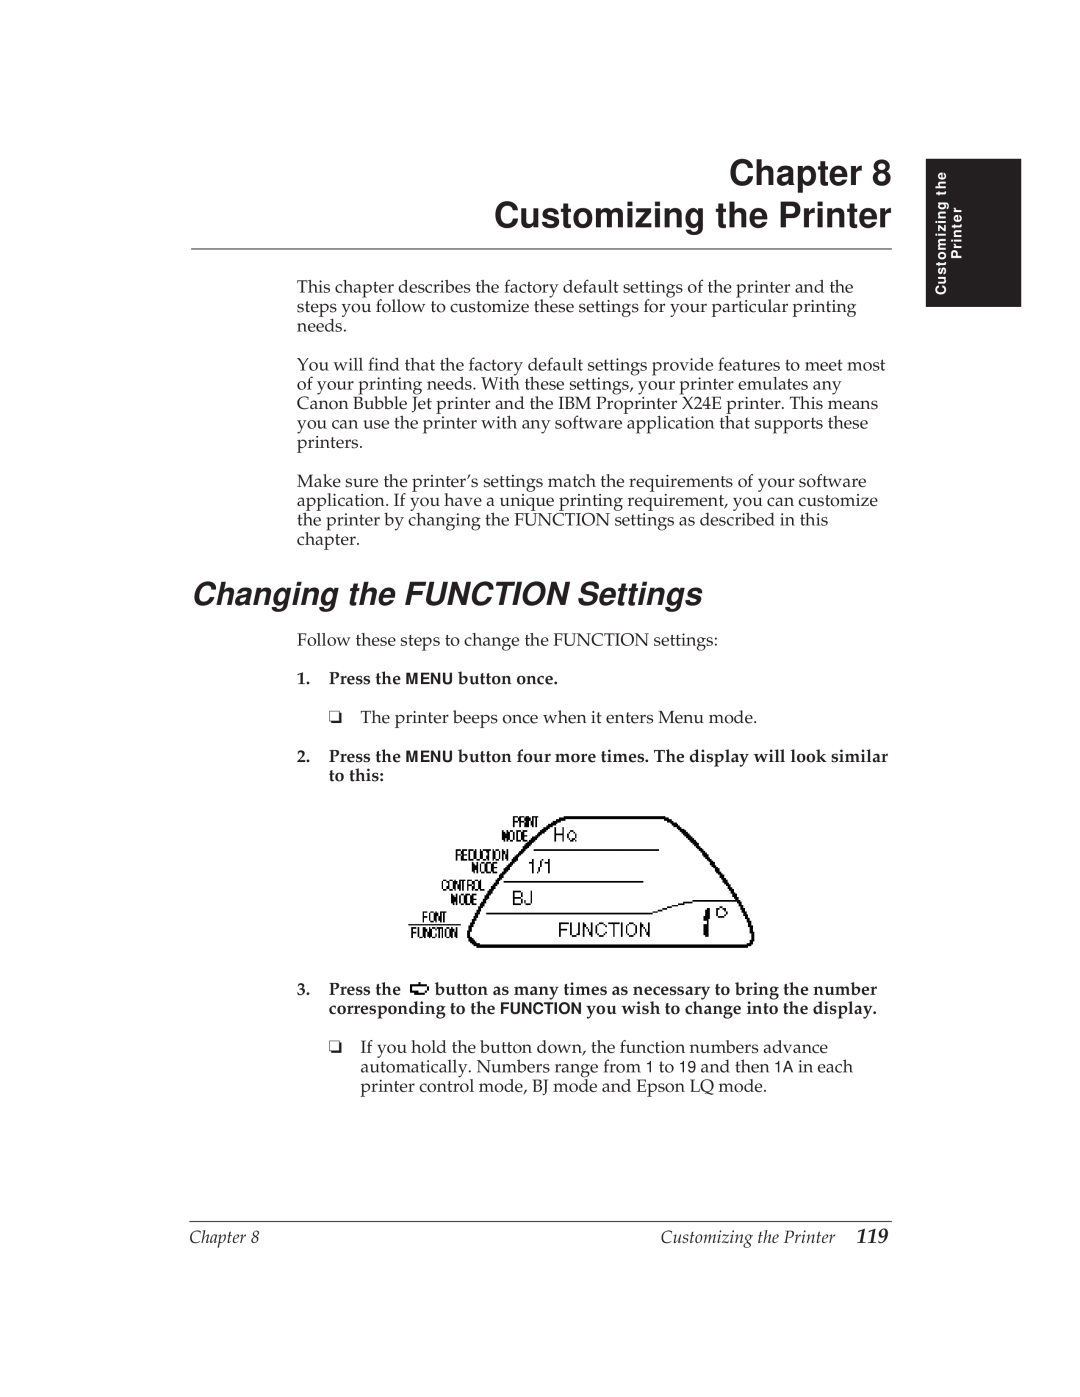 Canon BJ-30 manual Chapter Customizing the Printer, Changing the FUNCTION Settings, Press the MENU button once 